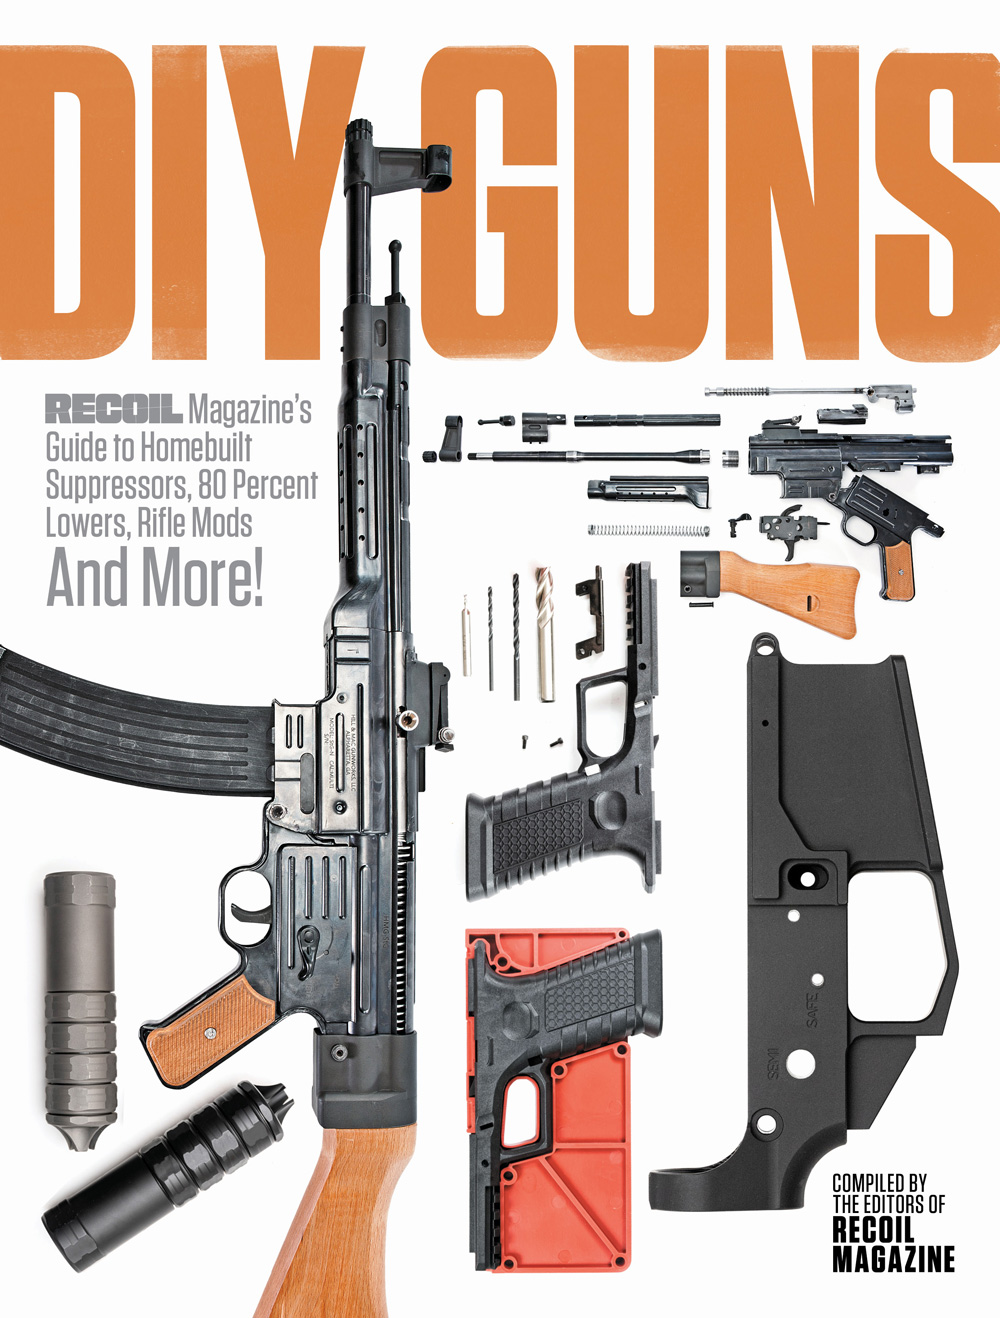 A Guide to Types of Guns, Gun Safety Tips, and How Guns Work